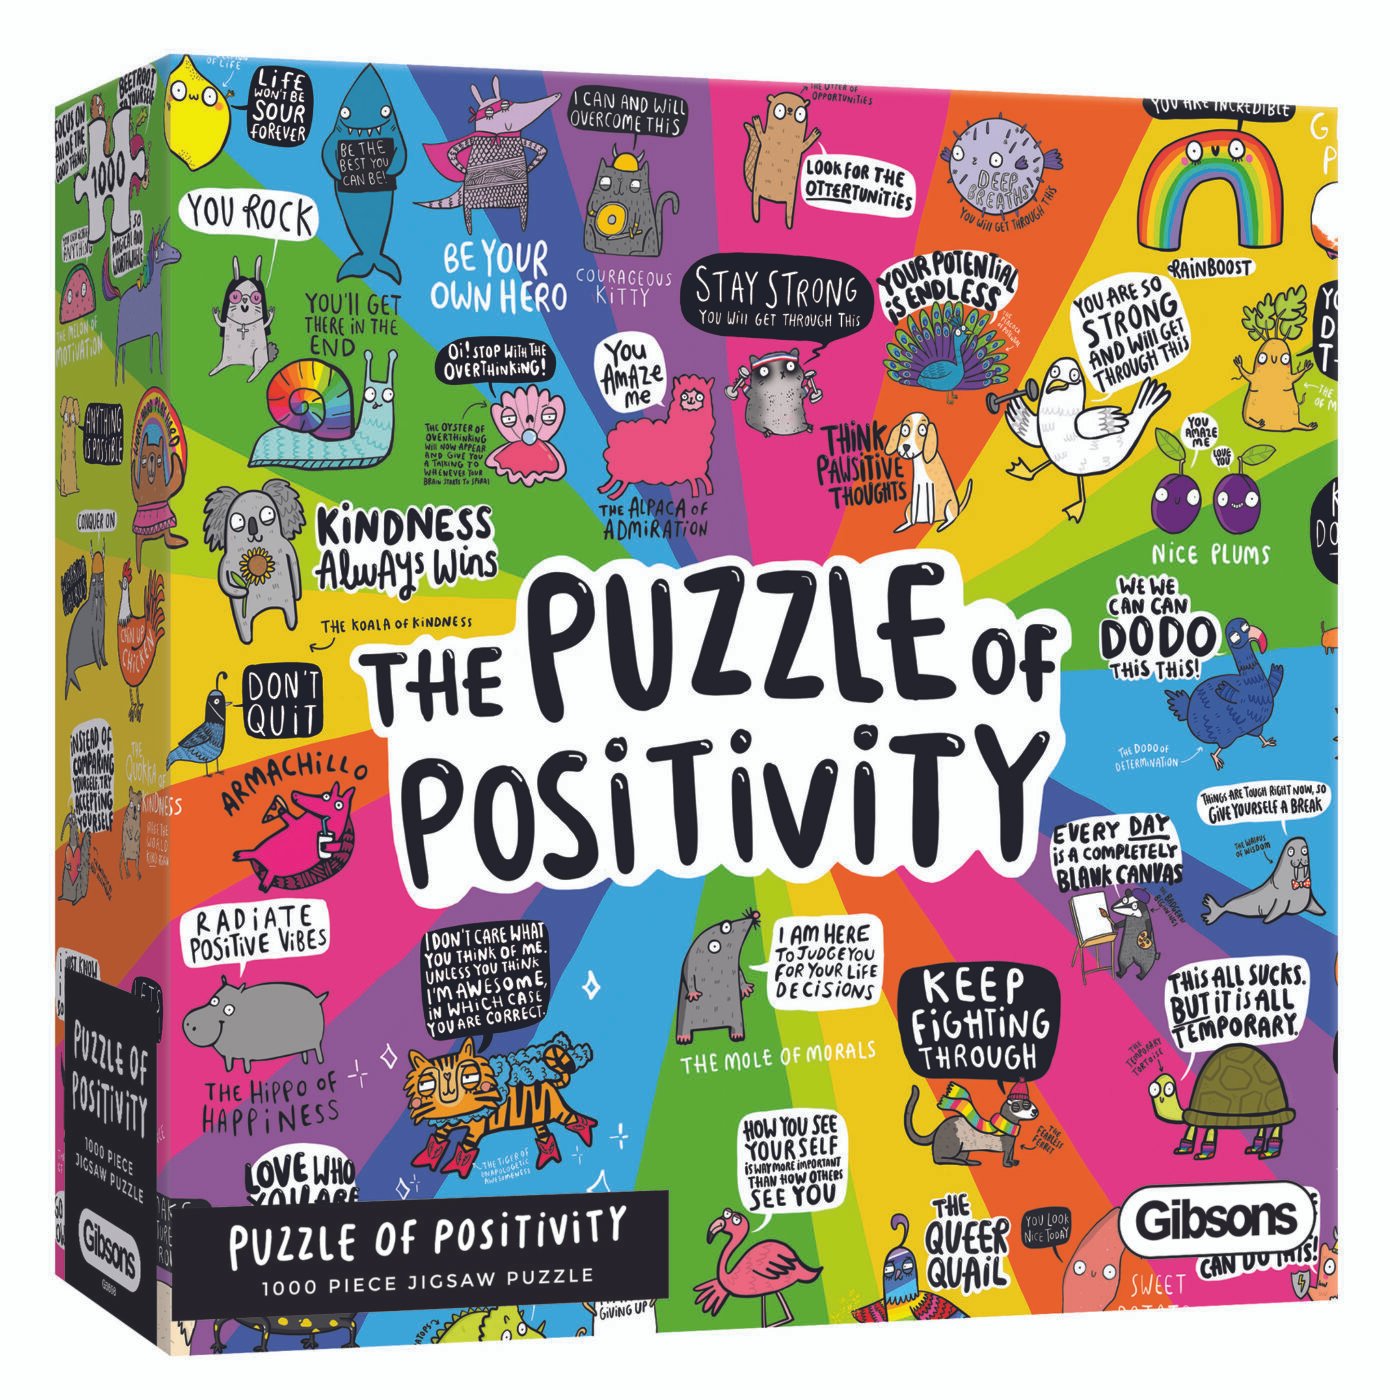 The Puzzle of Positivity